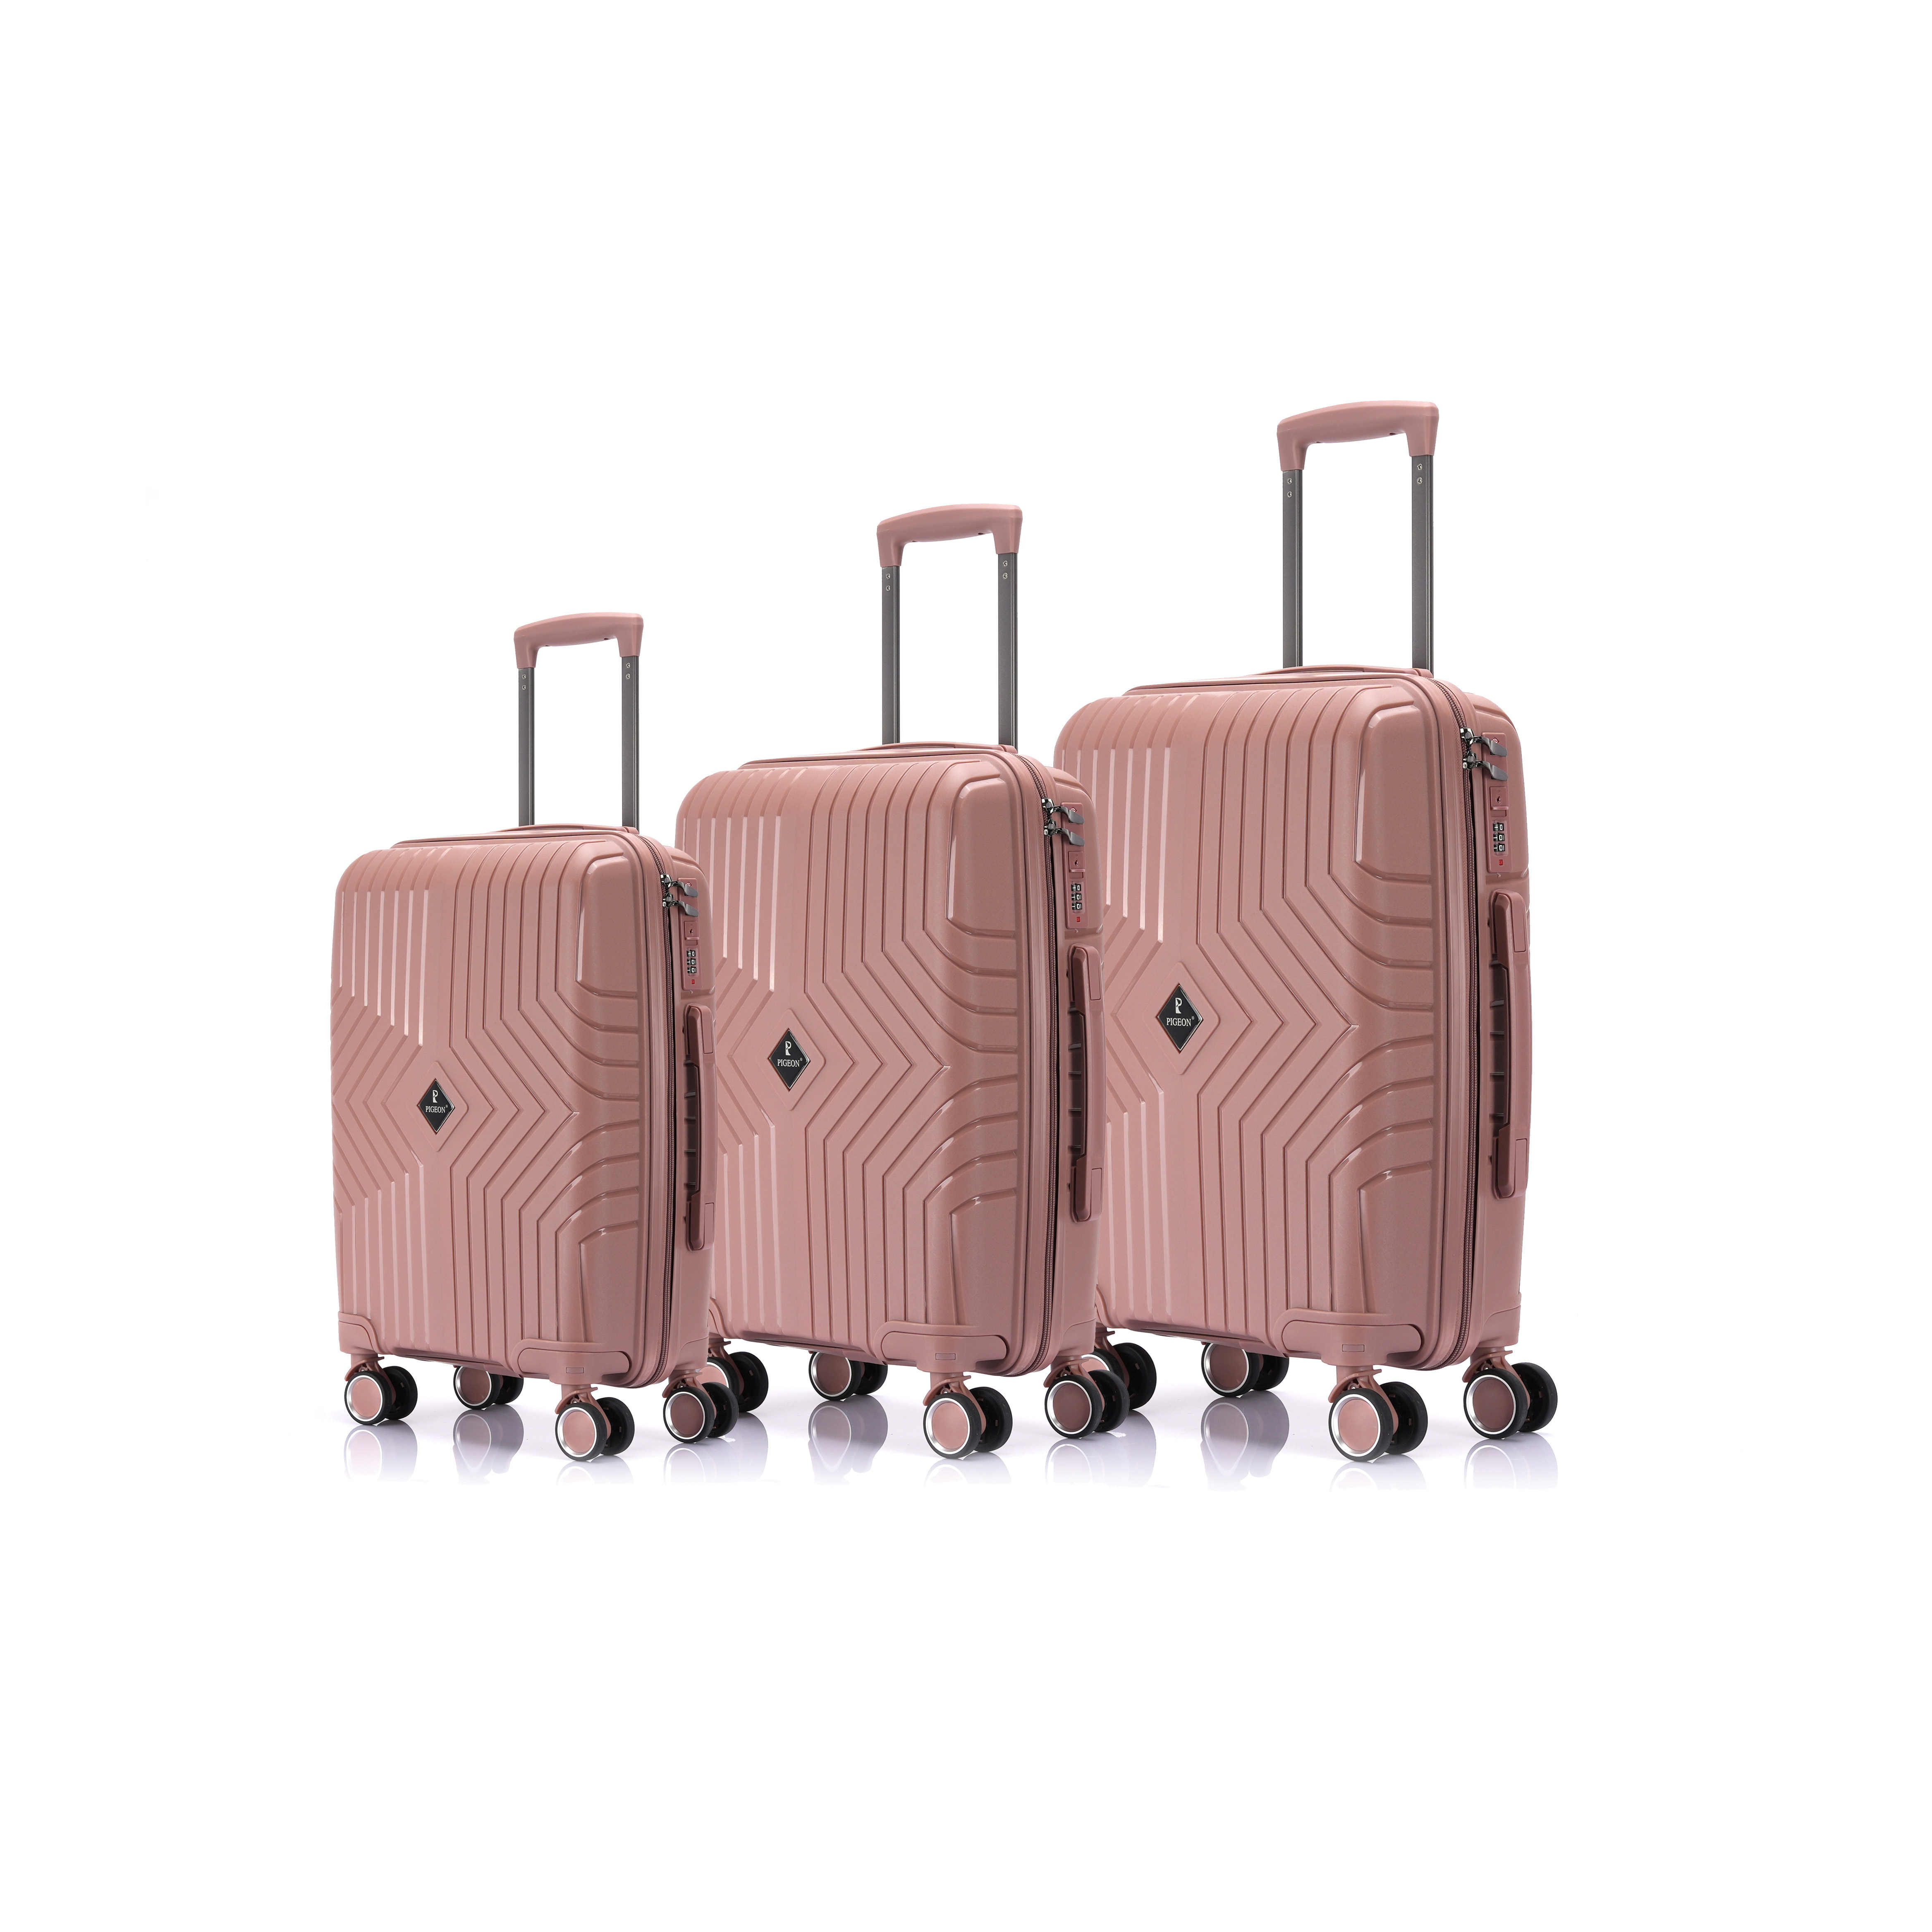 Luggage manufacturers in China carry on luggage